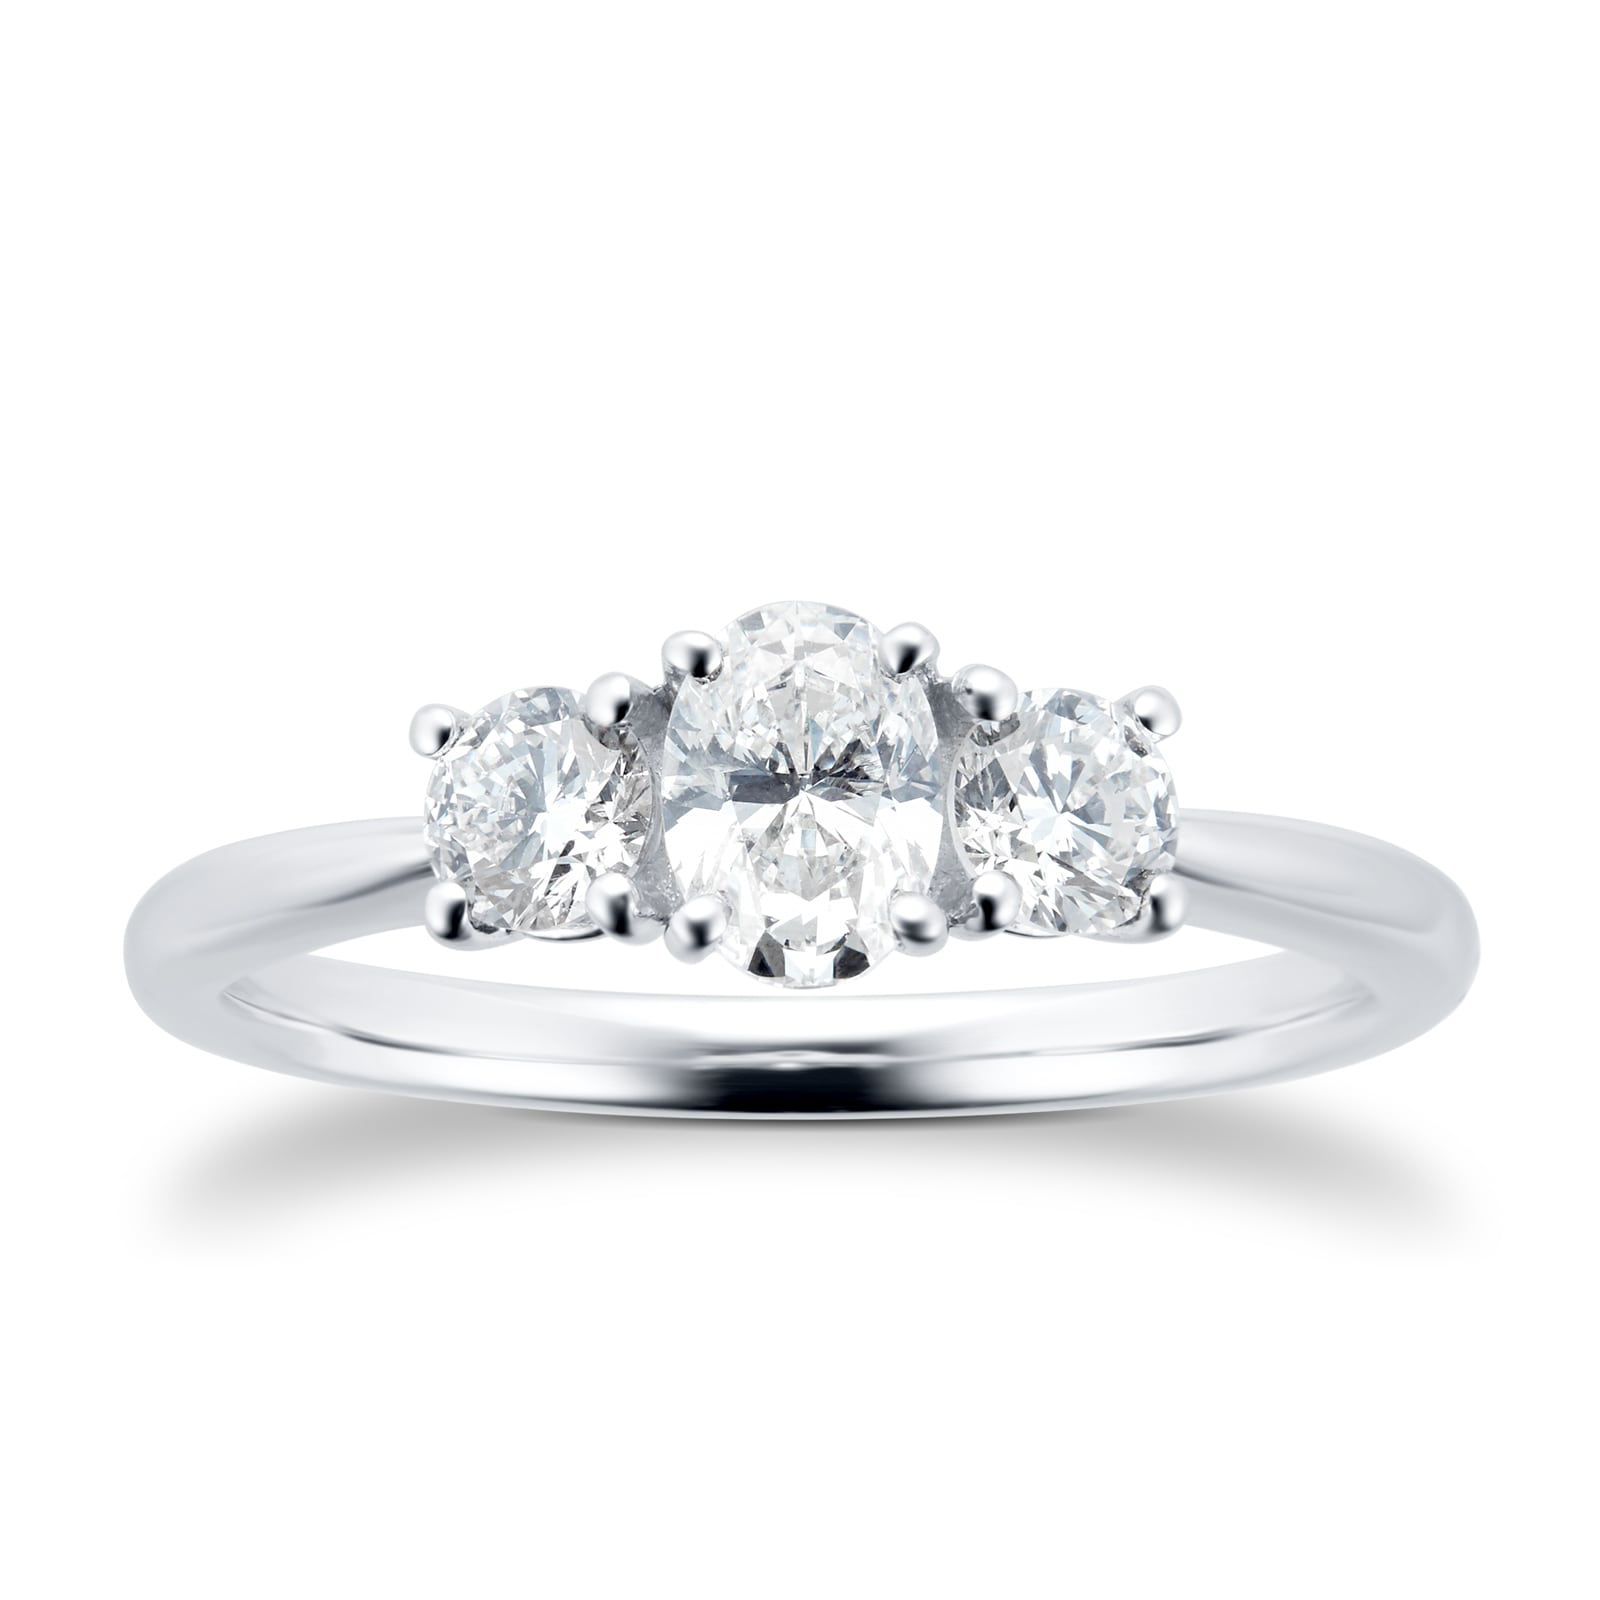 Platinum 0.76cttw Diamond Thee Stone Oval & Brilliant Cut Engagement Ring - Ring Size Q